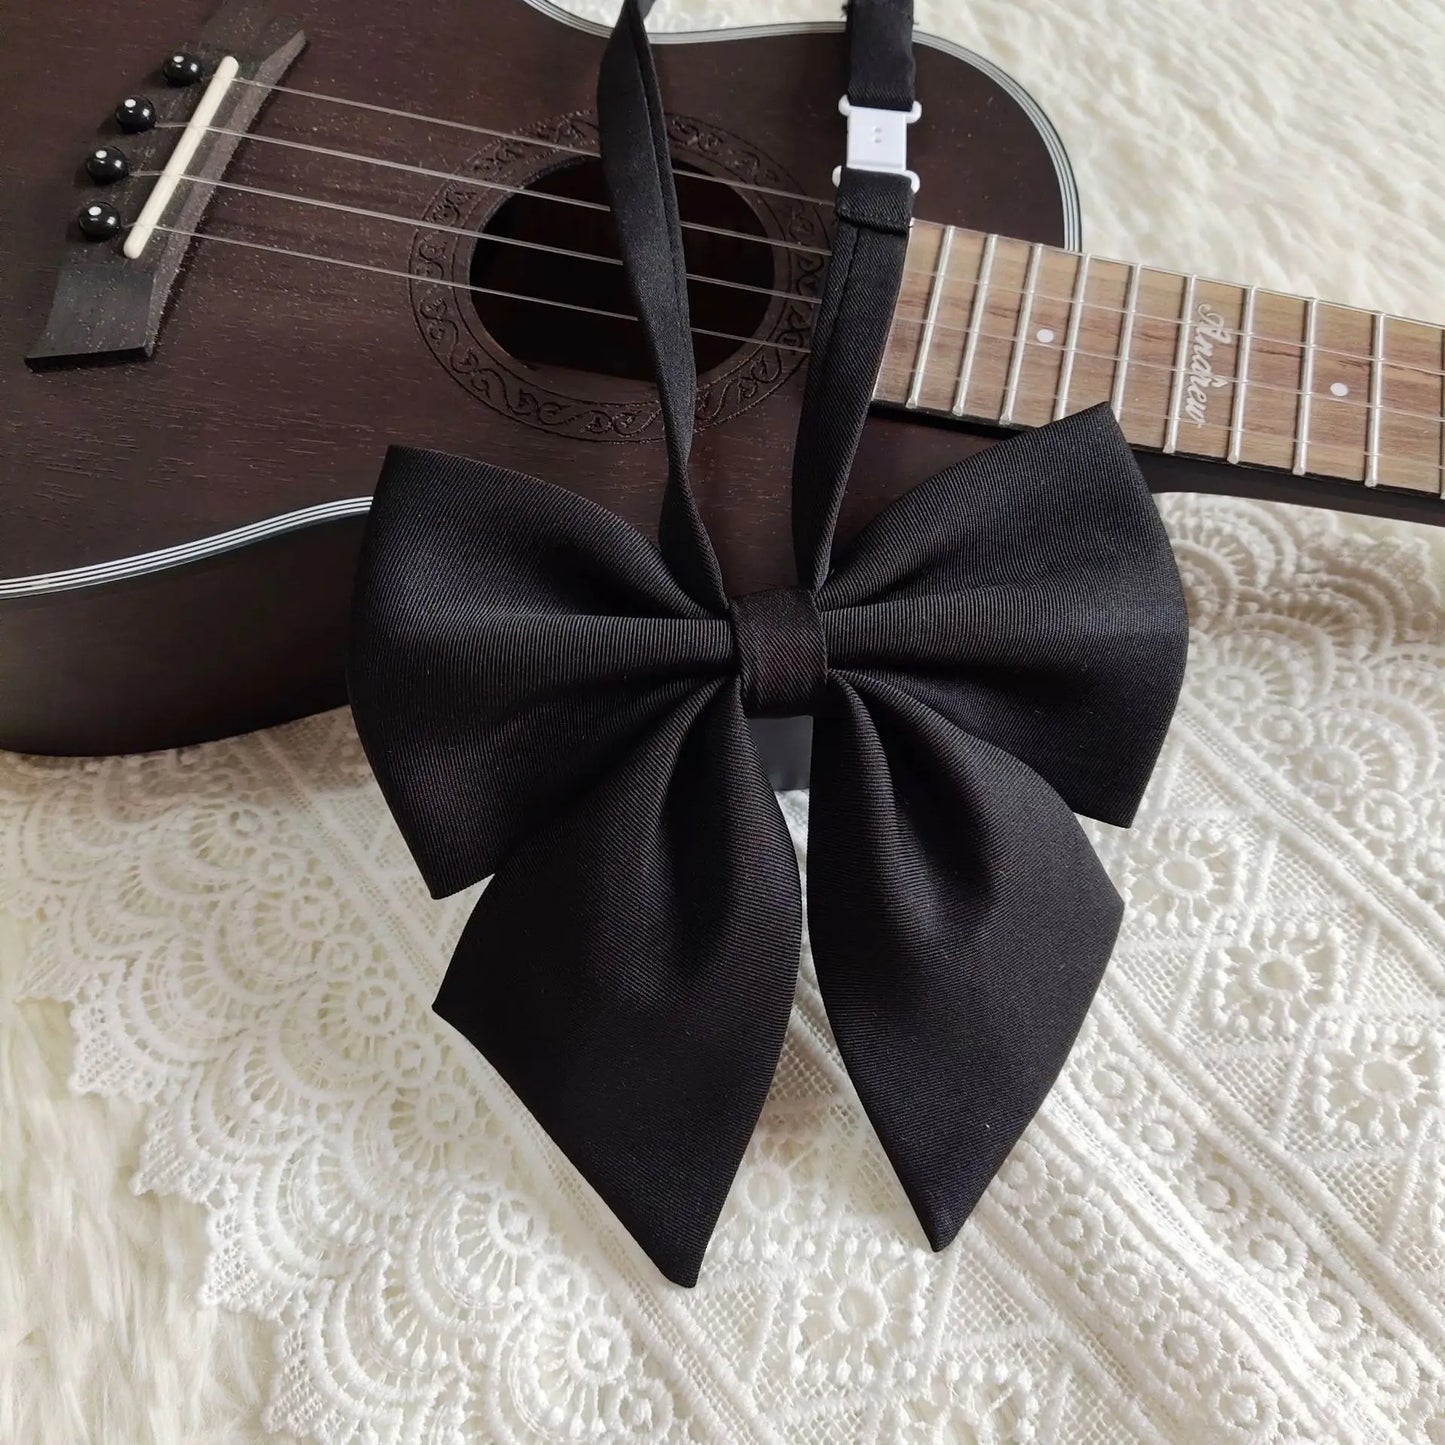 Japanese Style Bow Tie Colorful Women's Shirts Bowtie School Bowknot Butterfly Knot Suits Accessories